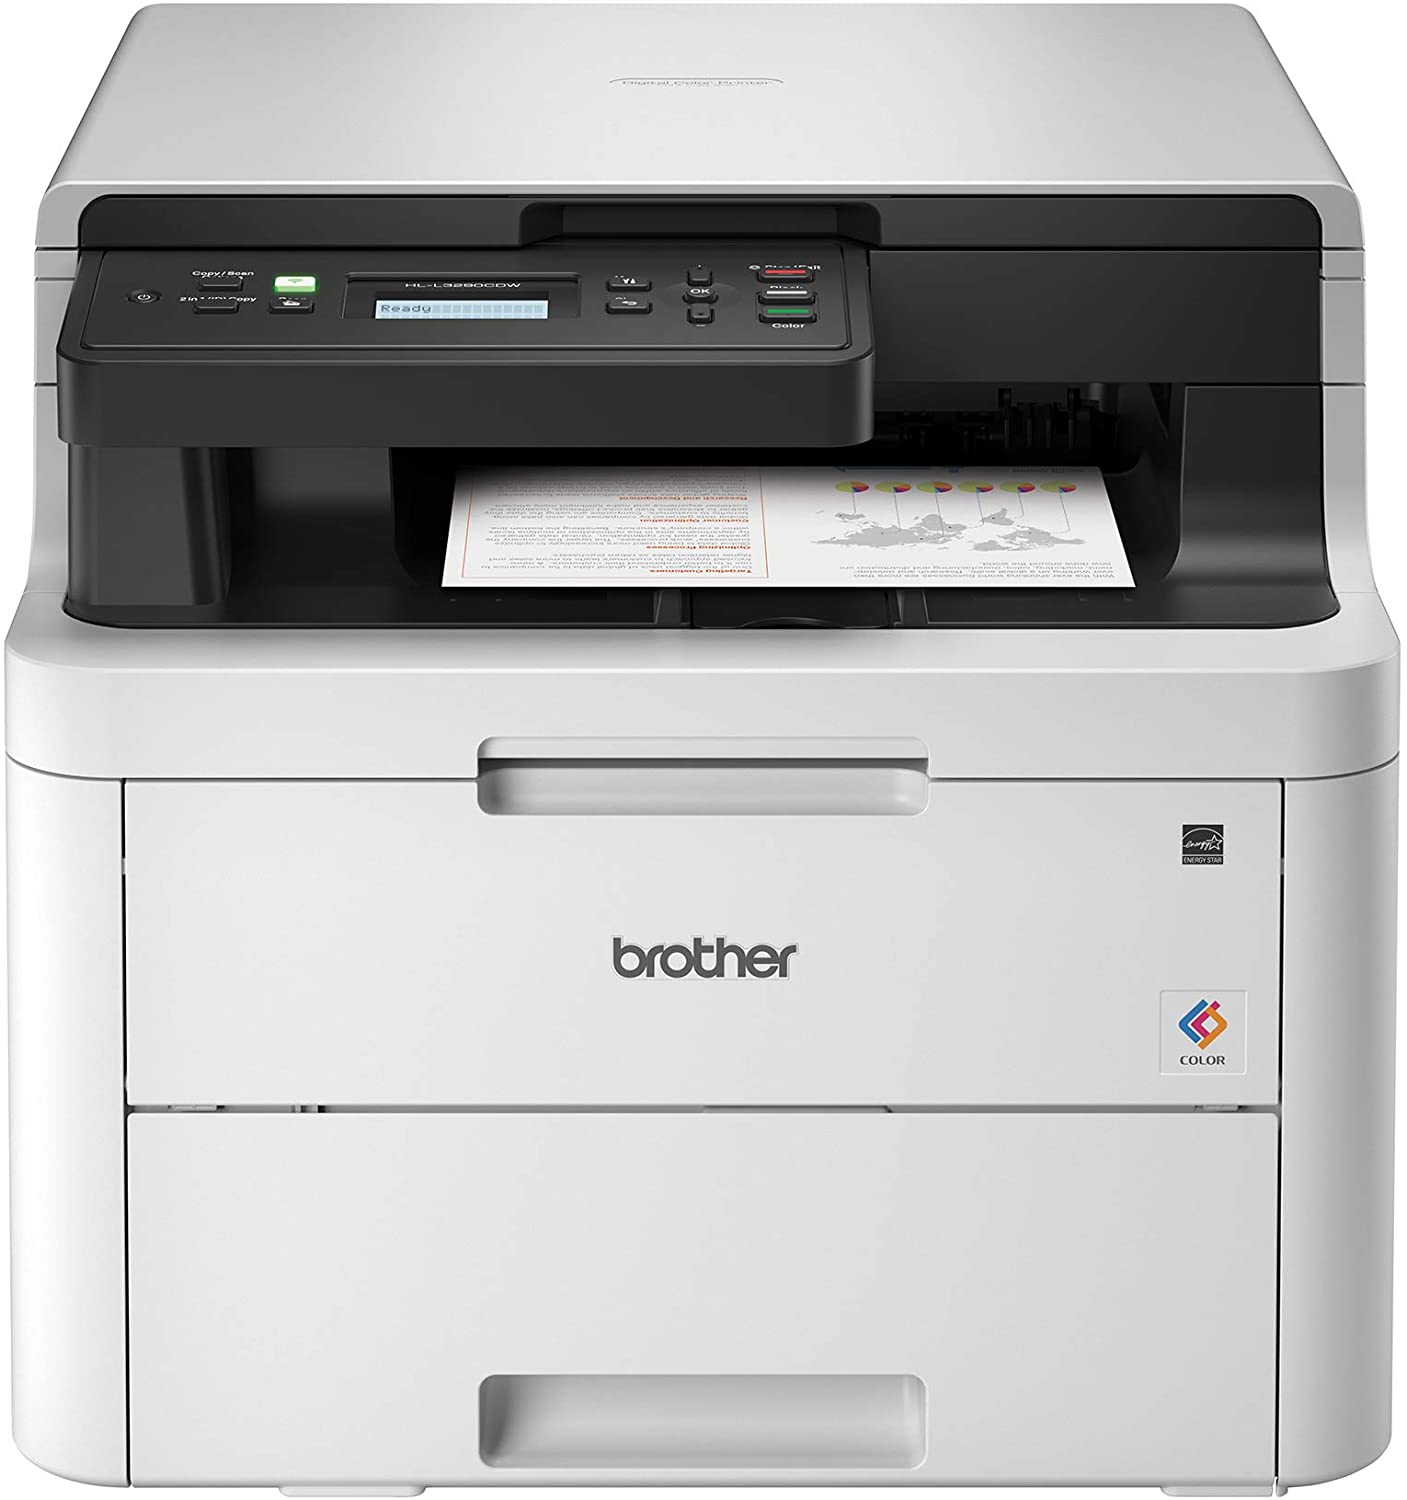 Brother HL-L3290CDW Compact Digital Color Printer Providing Laser Printer Quality Results with Convenient Flatbed Copy & Scan, Wireless Printing and Duplex Printing, Amazon Dash Replenishment Ready